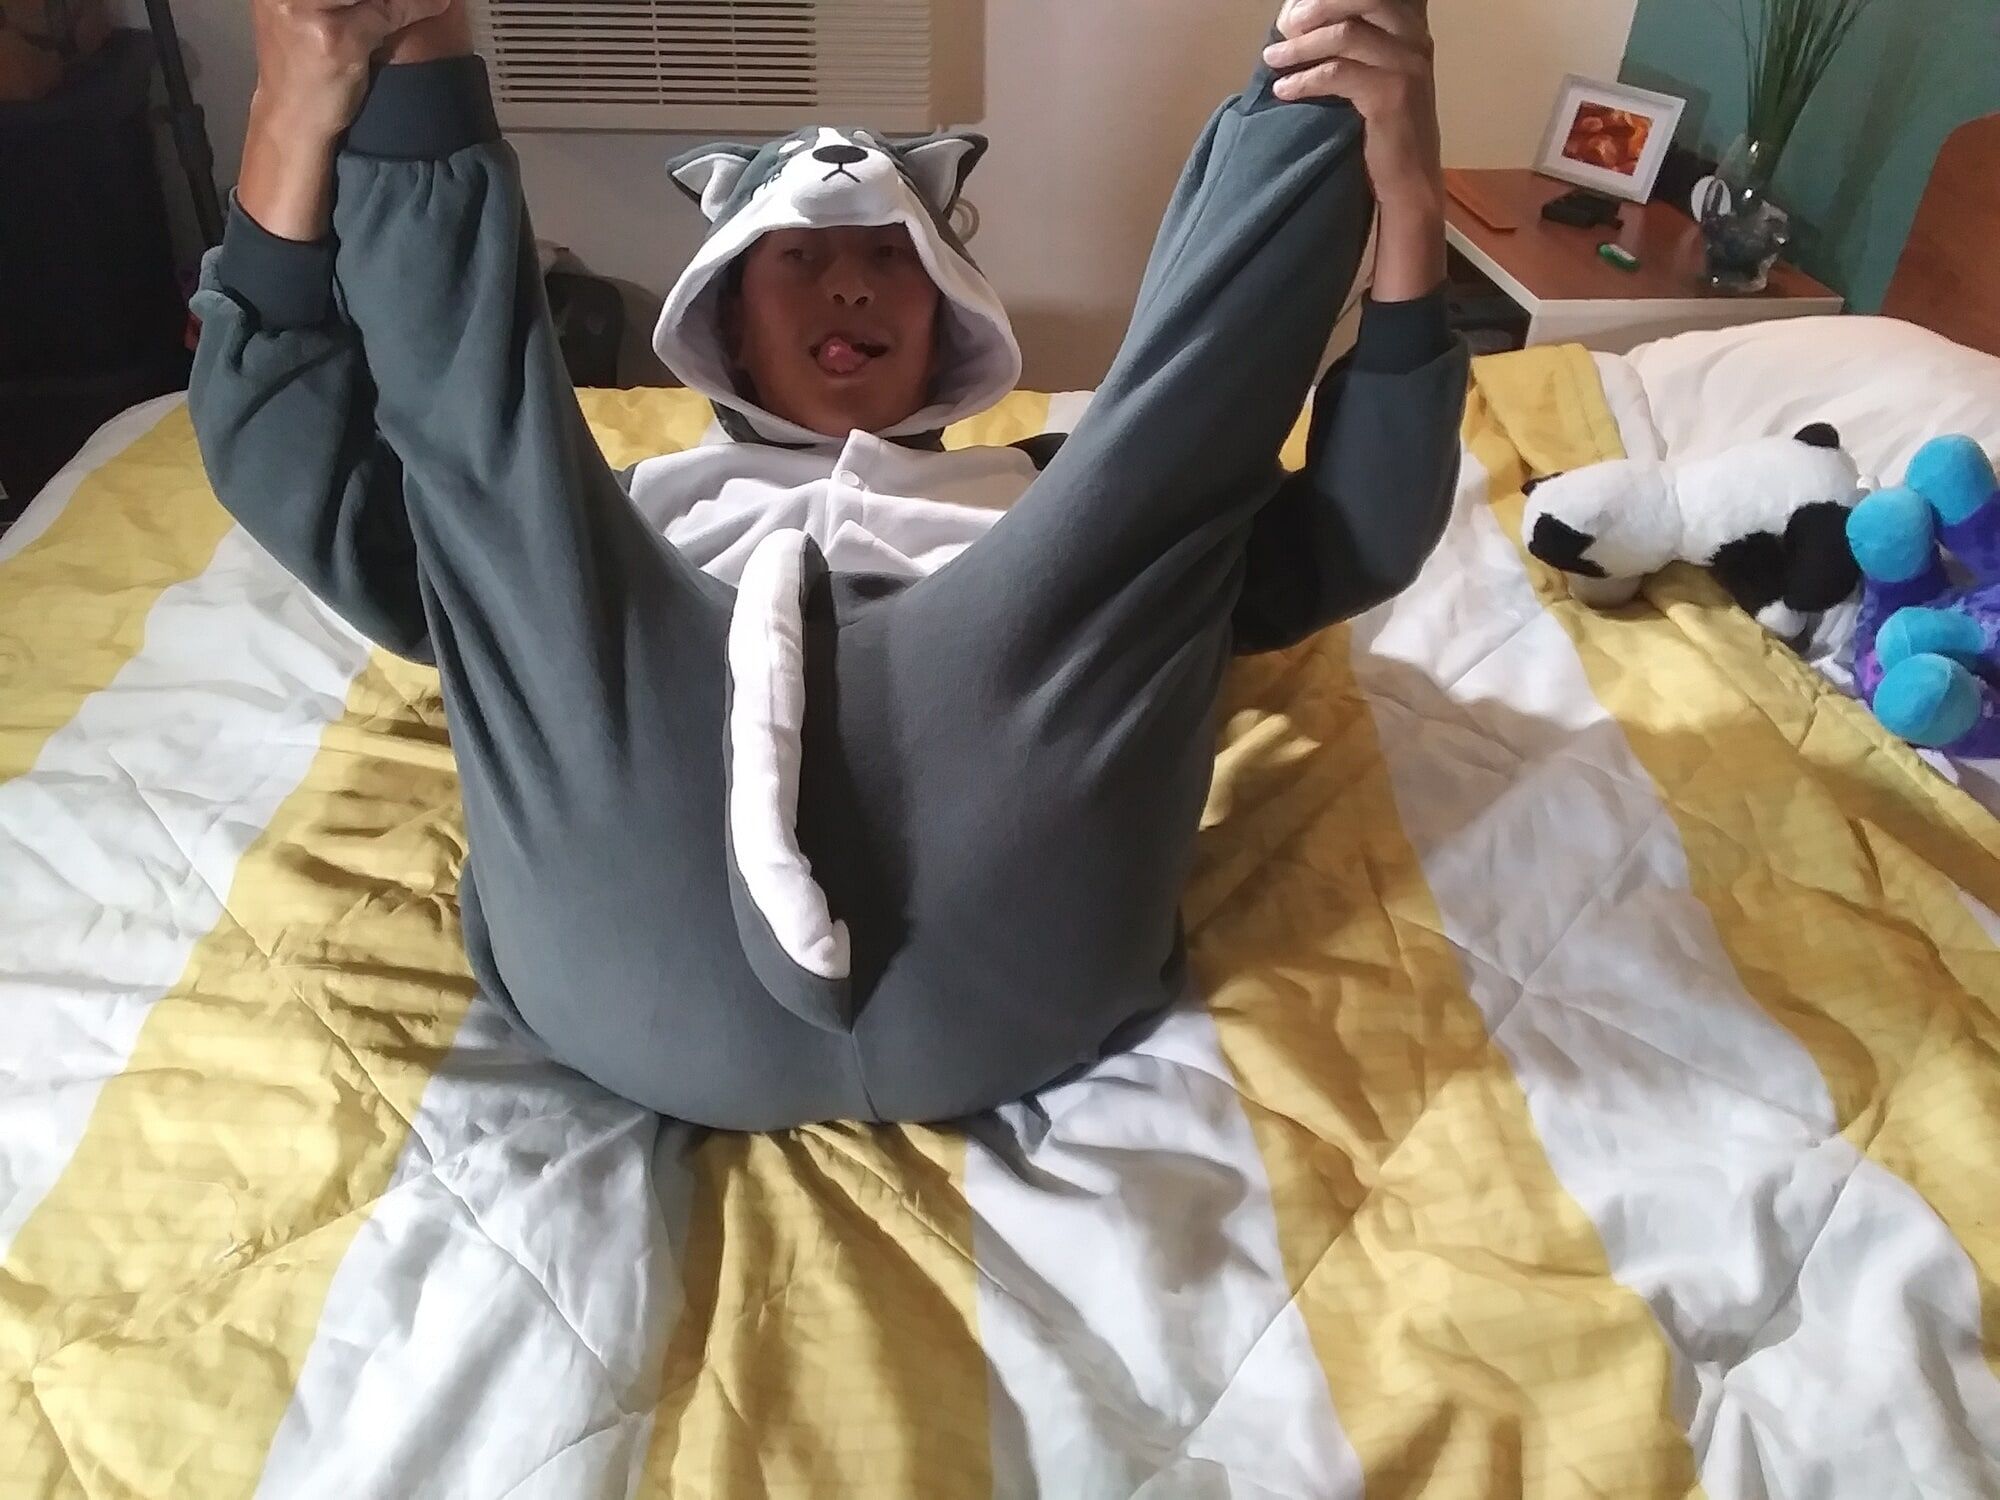 Hot asian boy wearing furry onesies and shiny undies #35